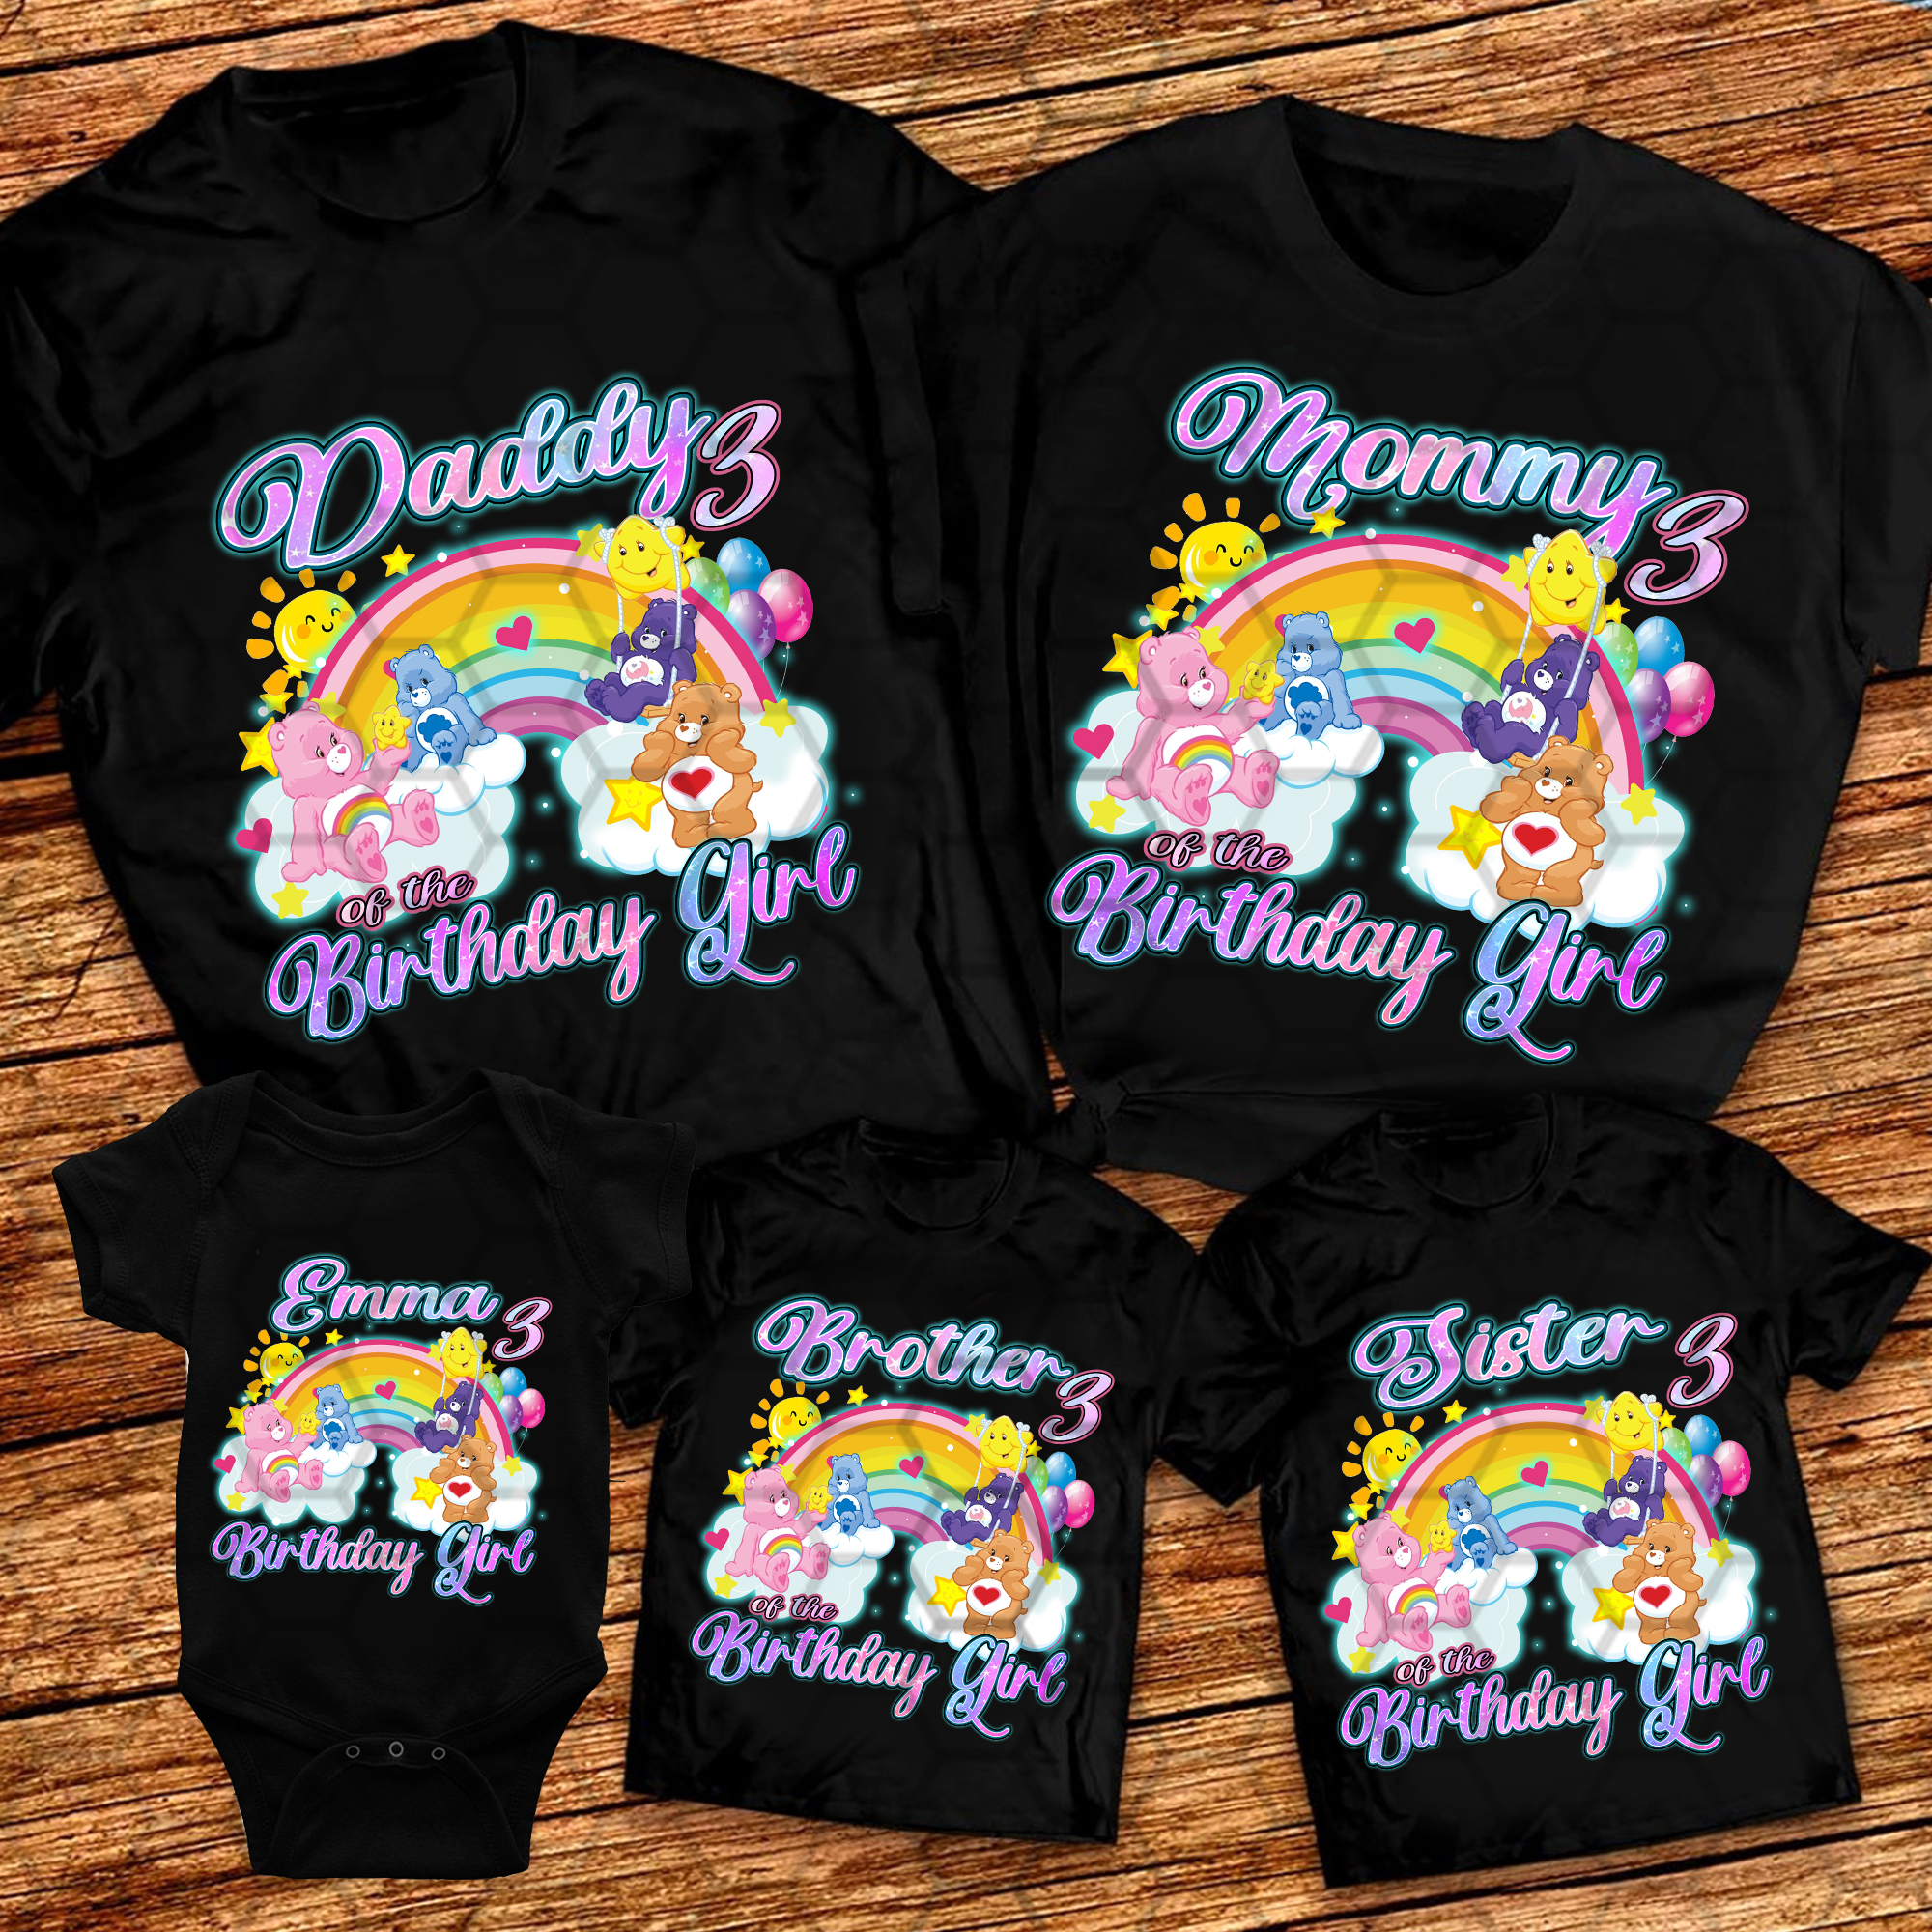 Personalized Care Bears Birthday Shirt,  Care Bears Family ShirtCute Bear Shirt, Rainbow Birthday Shirt, Personalized Name And Age